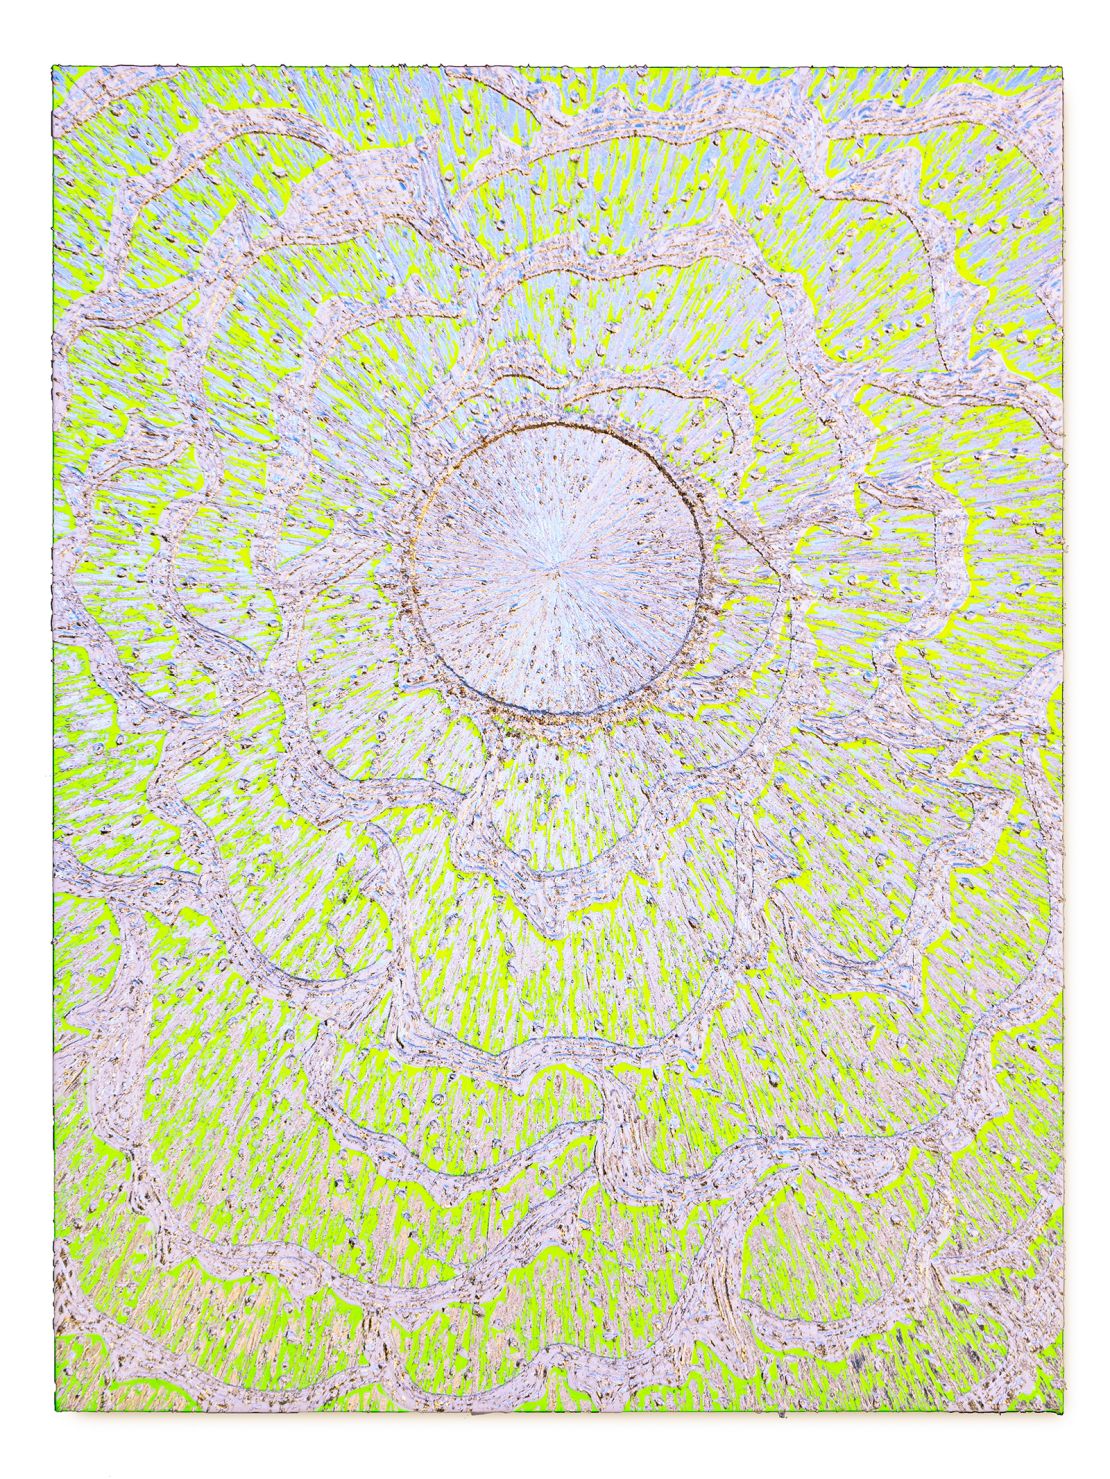 Klein's 2022 work "WEB (Like a Sunflower)" was made using bismuth, plaster and mixed media on woven glass.